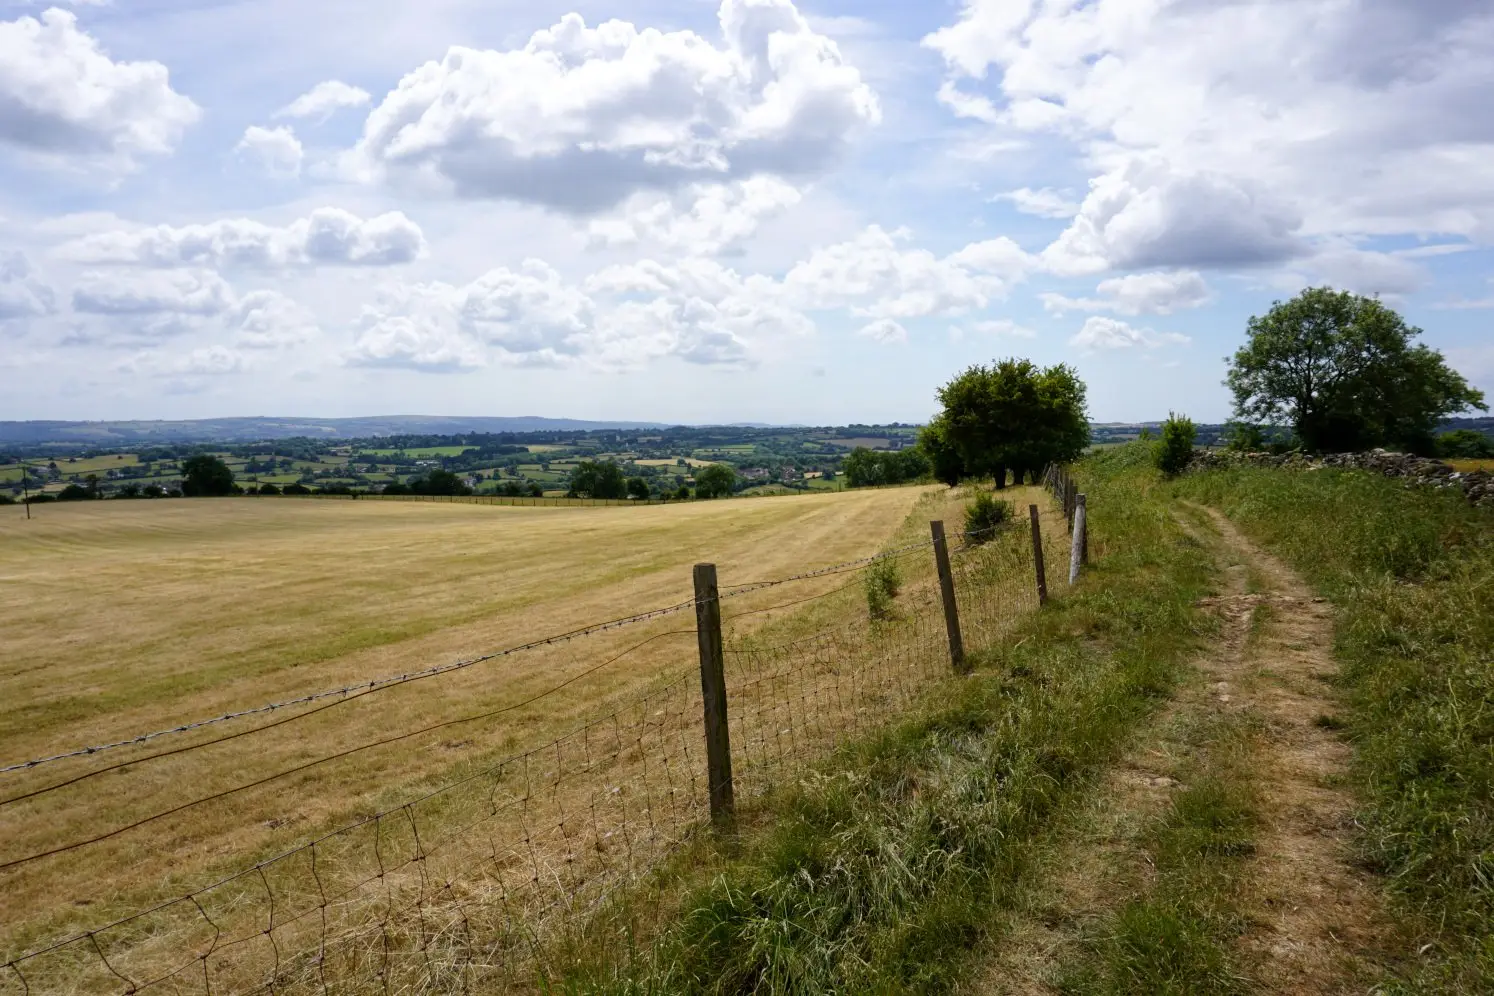 A charming country lane with views of the rolling Somerset hills near Bath and Bristol